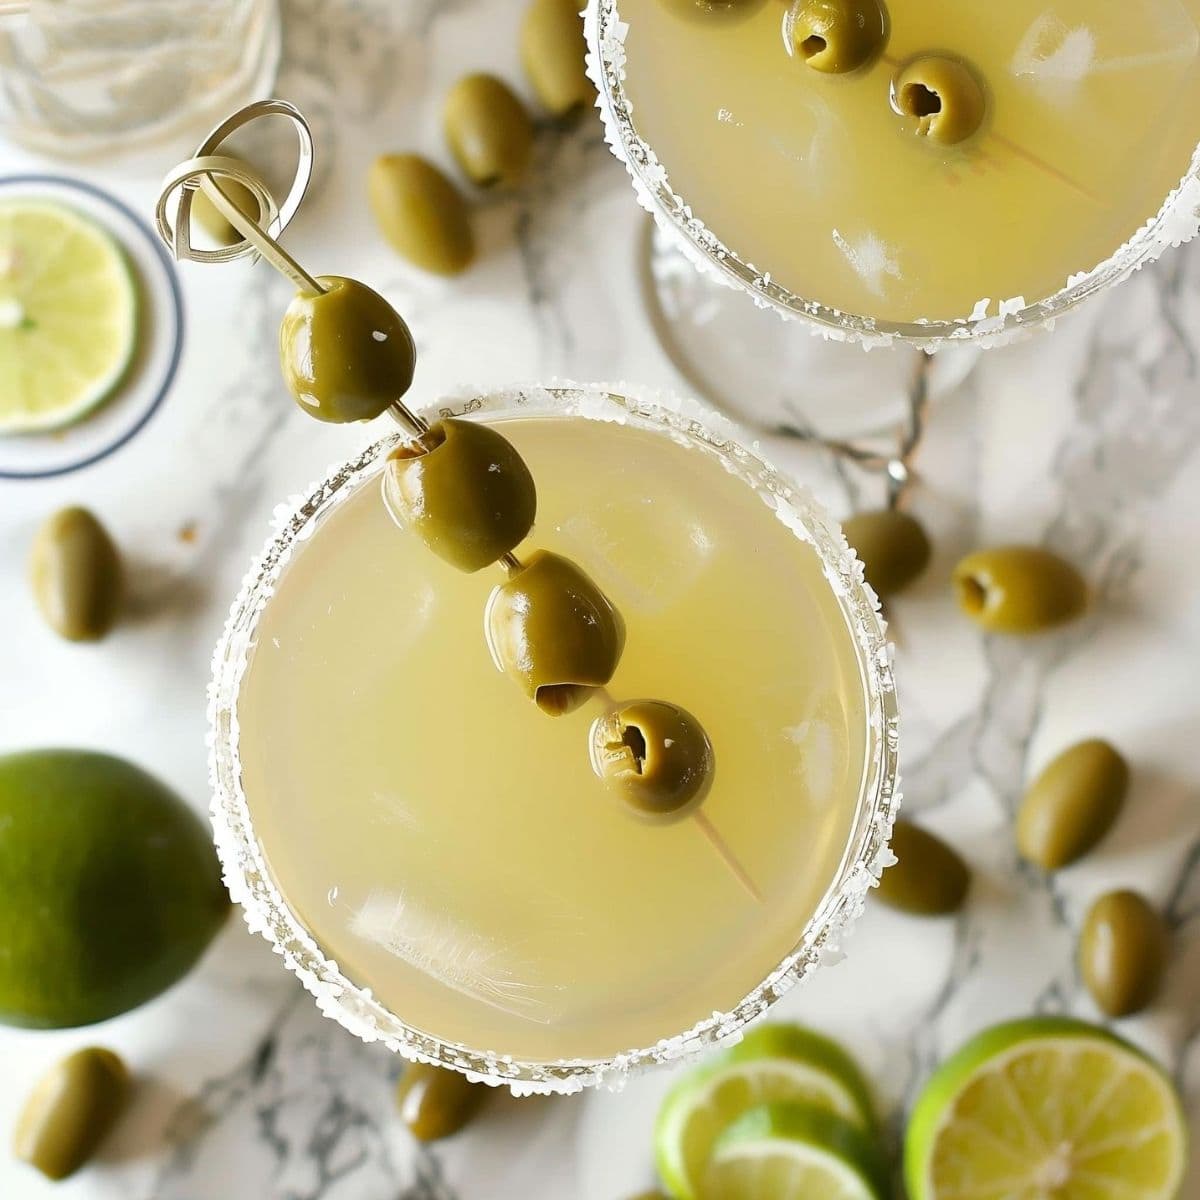 Top View Mexican Martinis with Salted Rims and Olives on a White Marble Table with Limes and Olives Around the Table